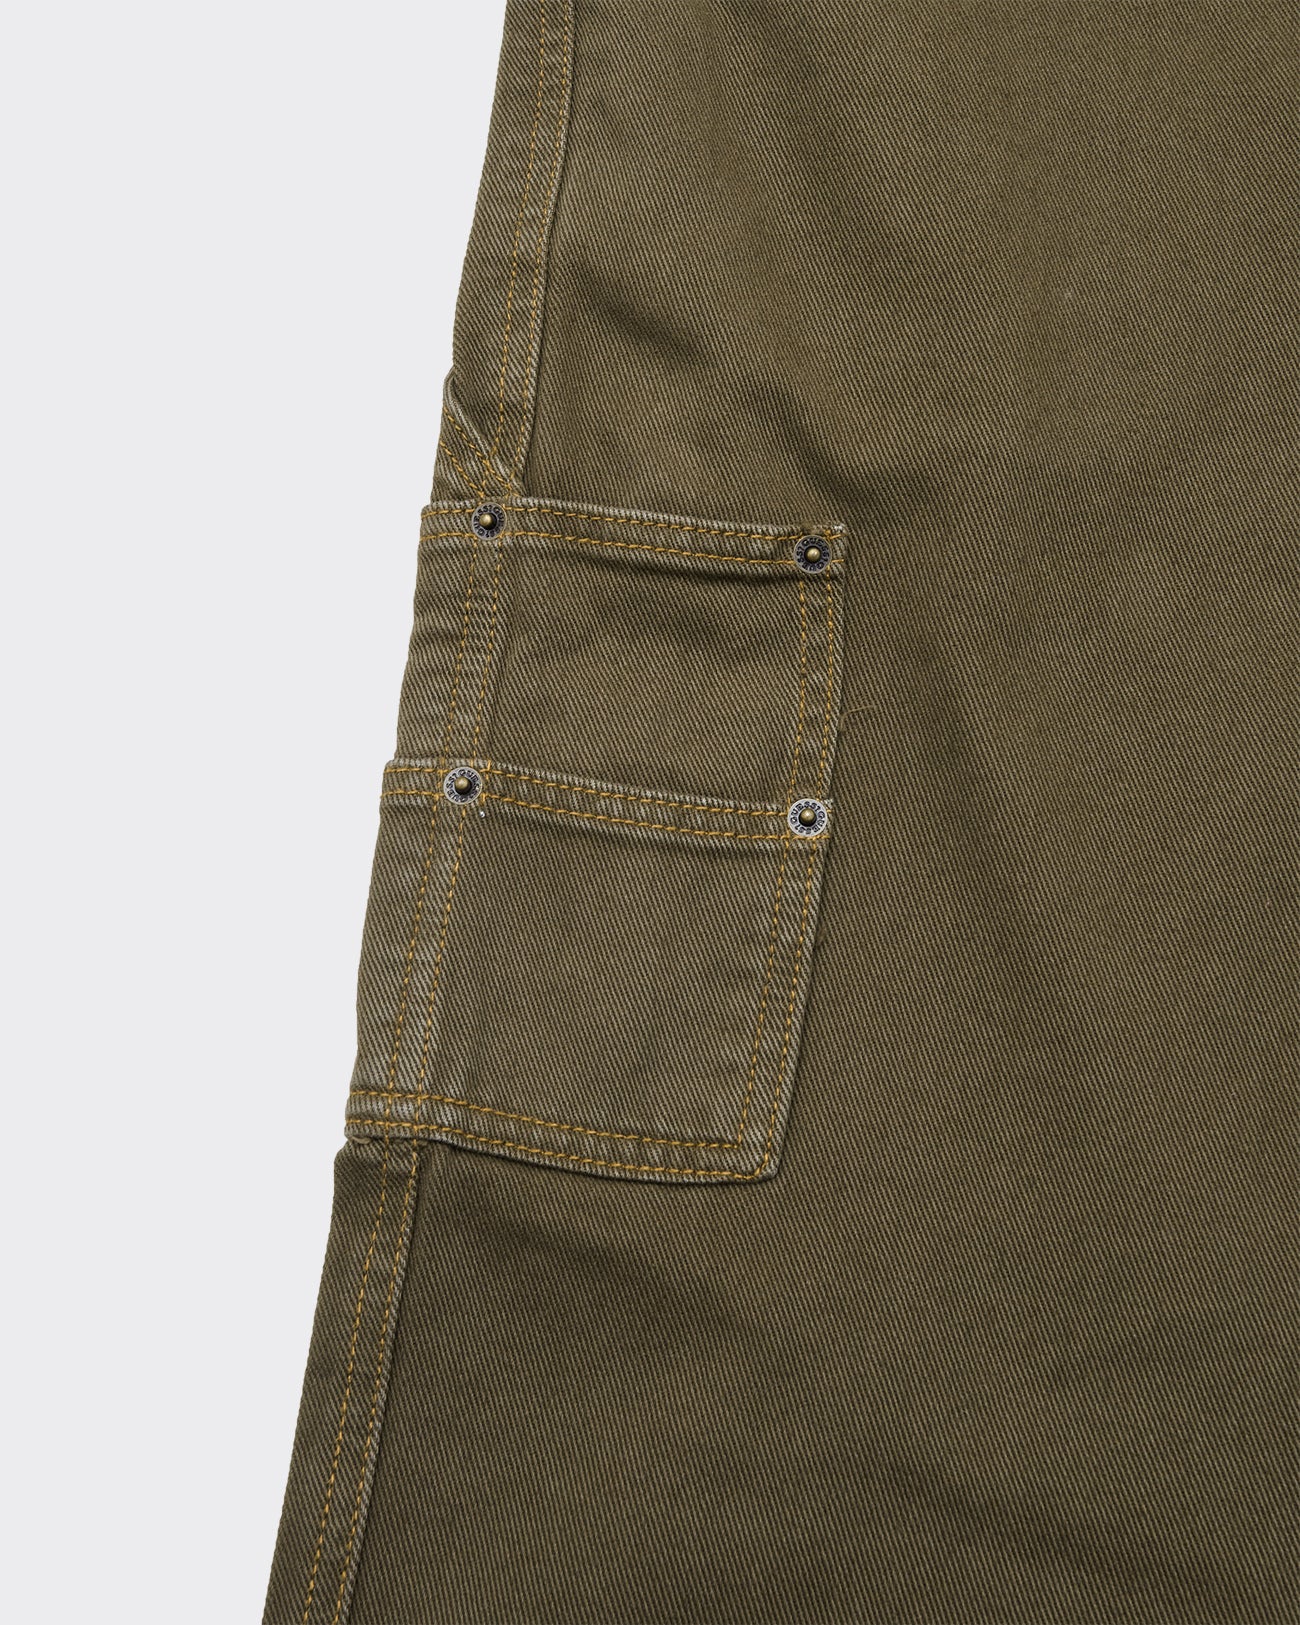 Overdyed Carpenter Vintage Green Trousers